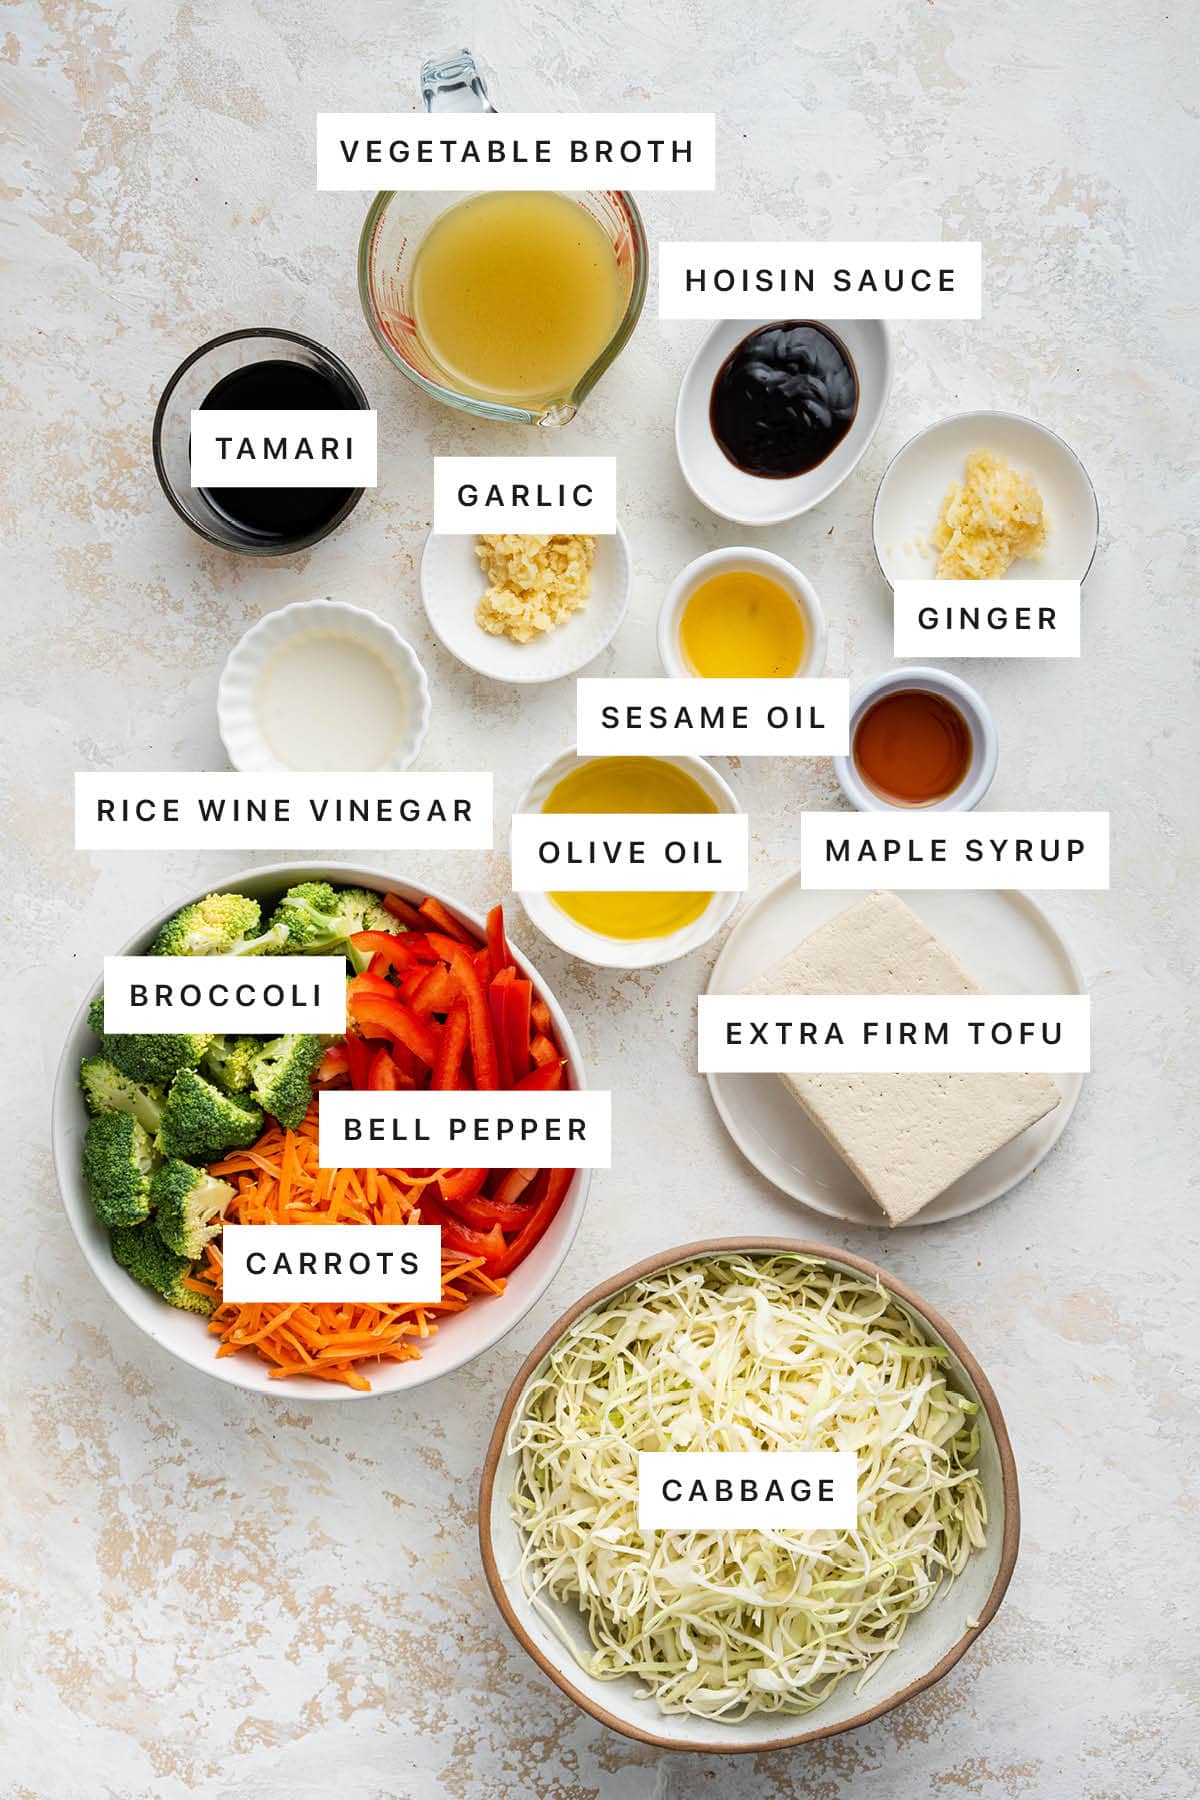 Ingredients measured out to make Tofu Cabbage Noodle Bowl: veggie broth, hoisin sauce, tamari, garlic, sesame oil, ginger, rice wine vinegar, olive oil, maple syrup, broccoli, tofu, bell pepper, carrots and cabbge.